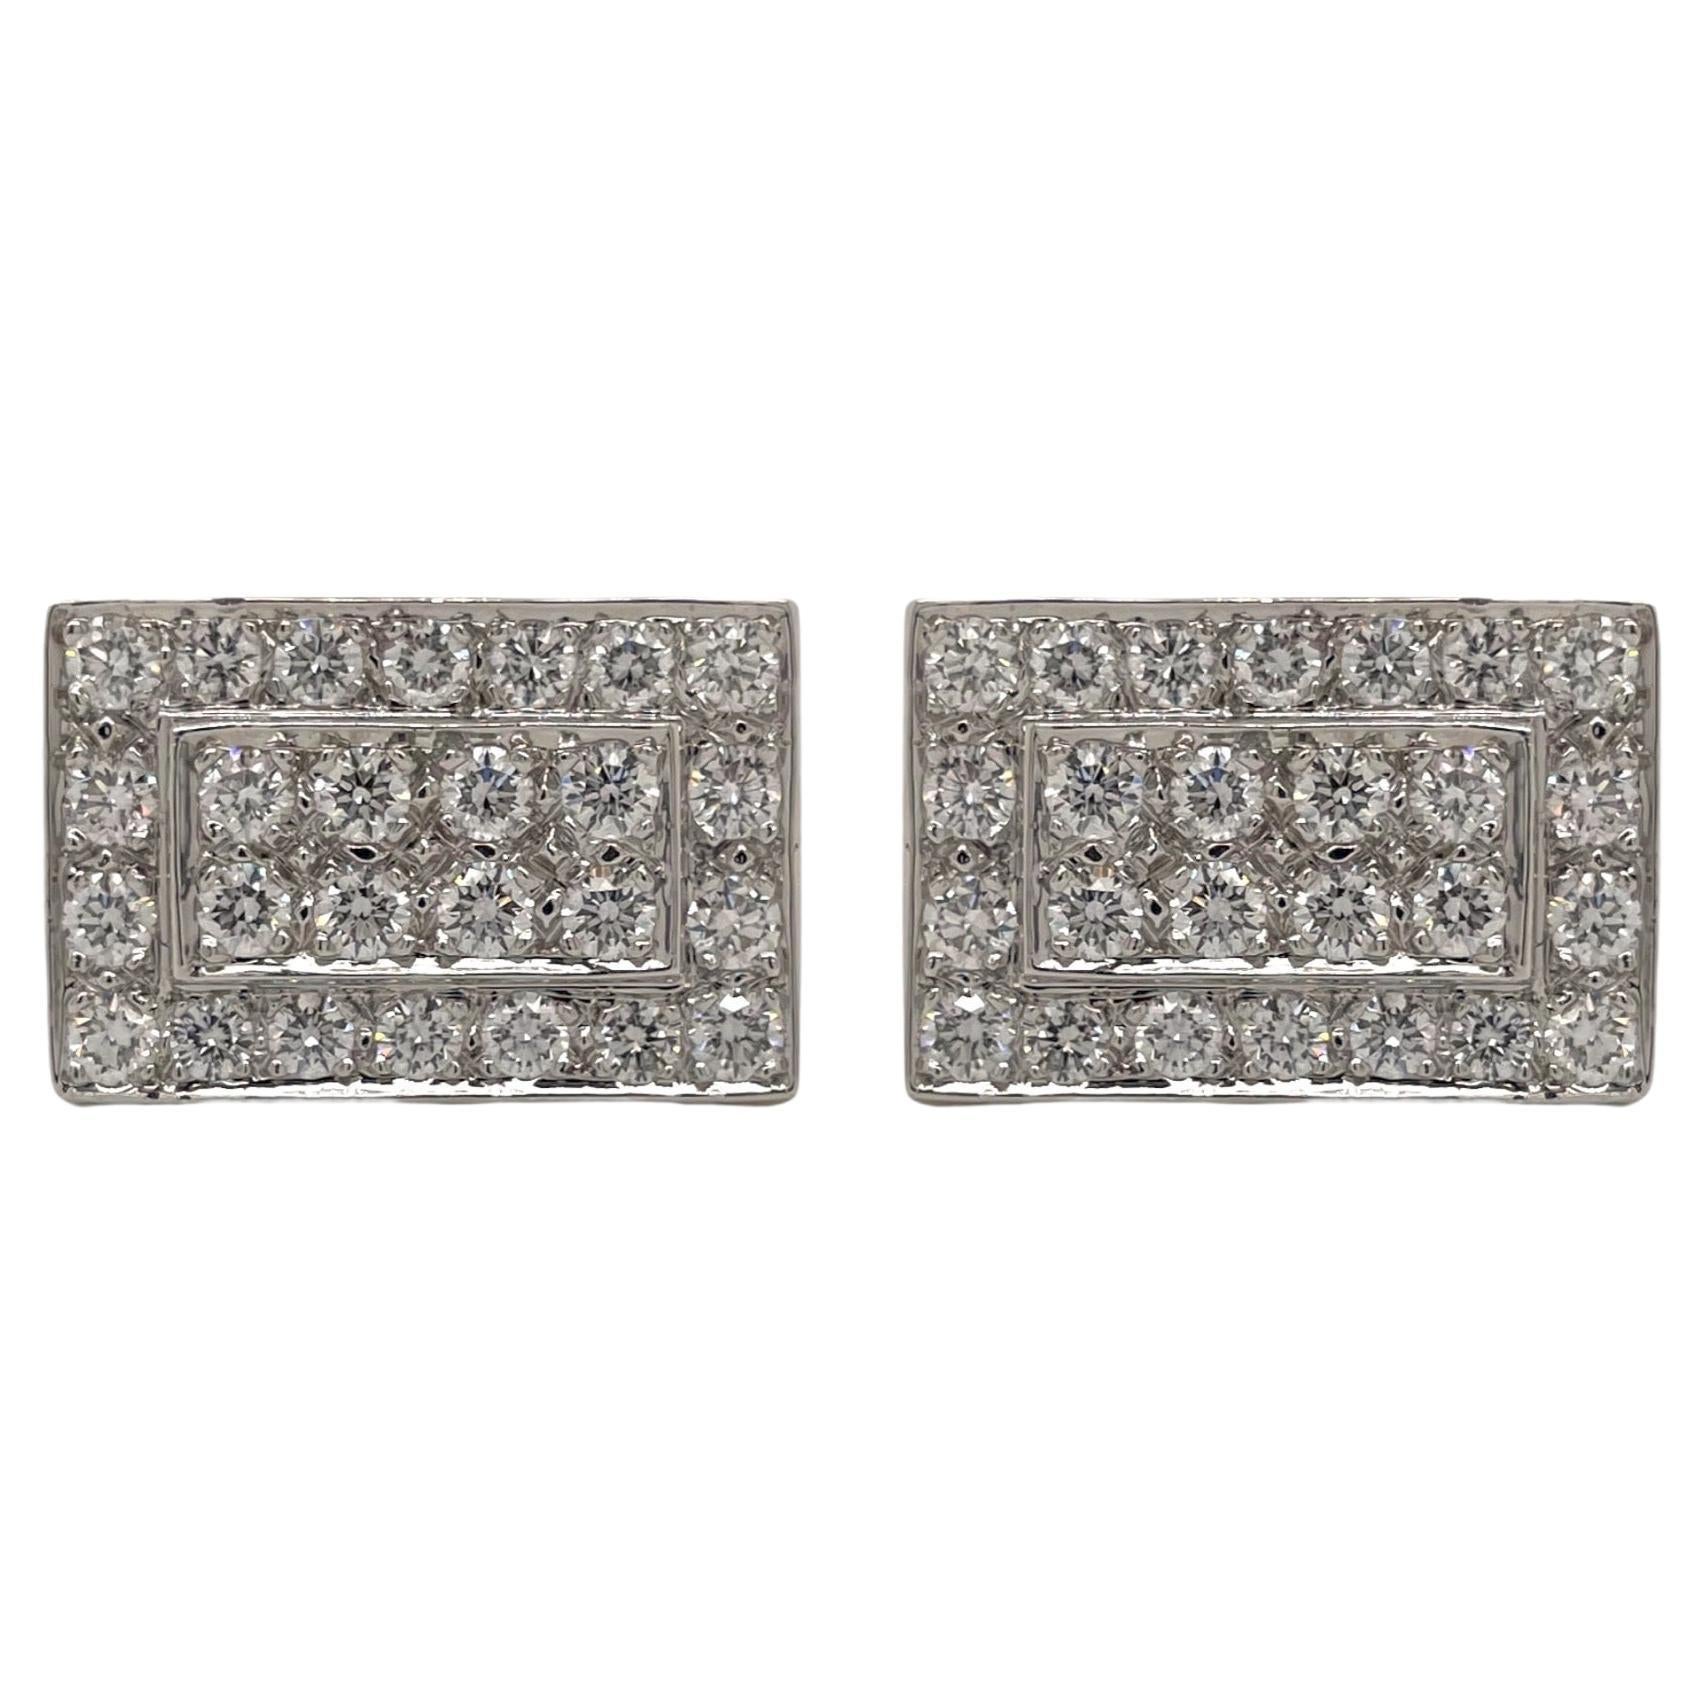 One pair of diamond and 14k  white gold rectangular cufflinks. 
Cufflinks contain 96 round brilliant diamonds, 2.25tcw. Diamonds are colorless and VS2 in clarity. Cufflink measure approximately 19x13mm and weighs a total of 14.3g.

All of our pieces